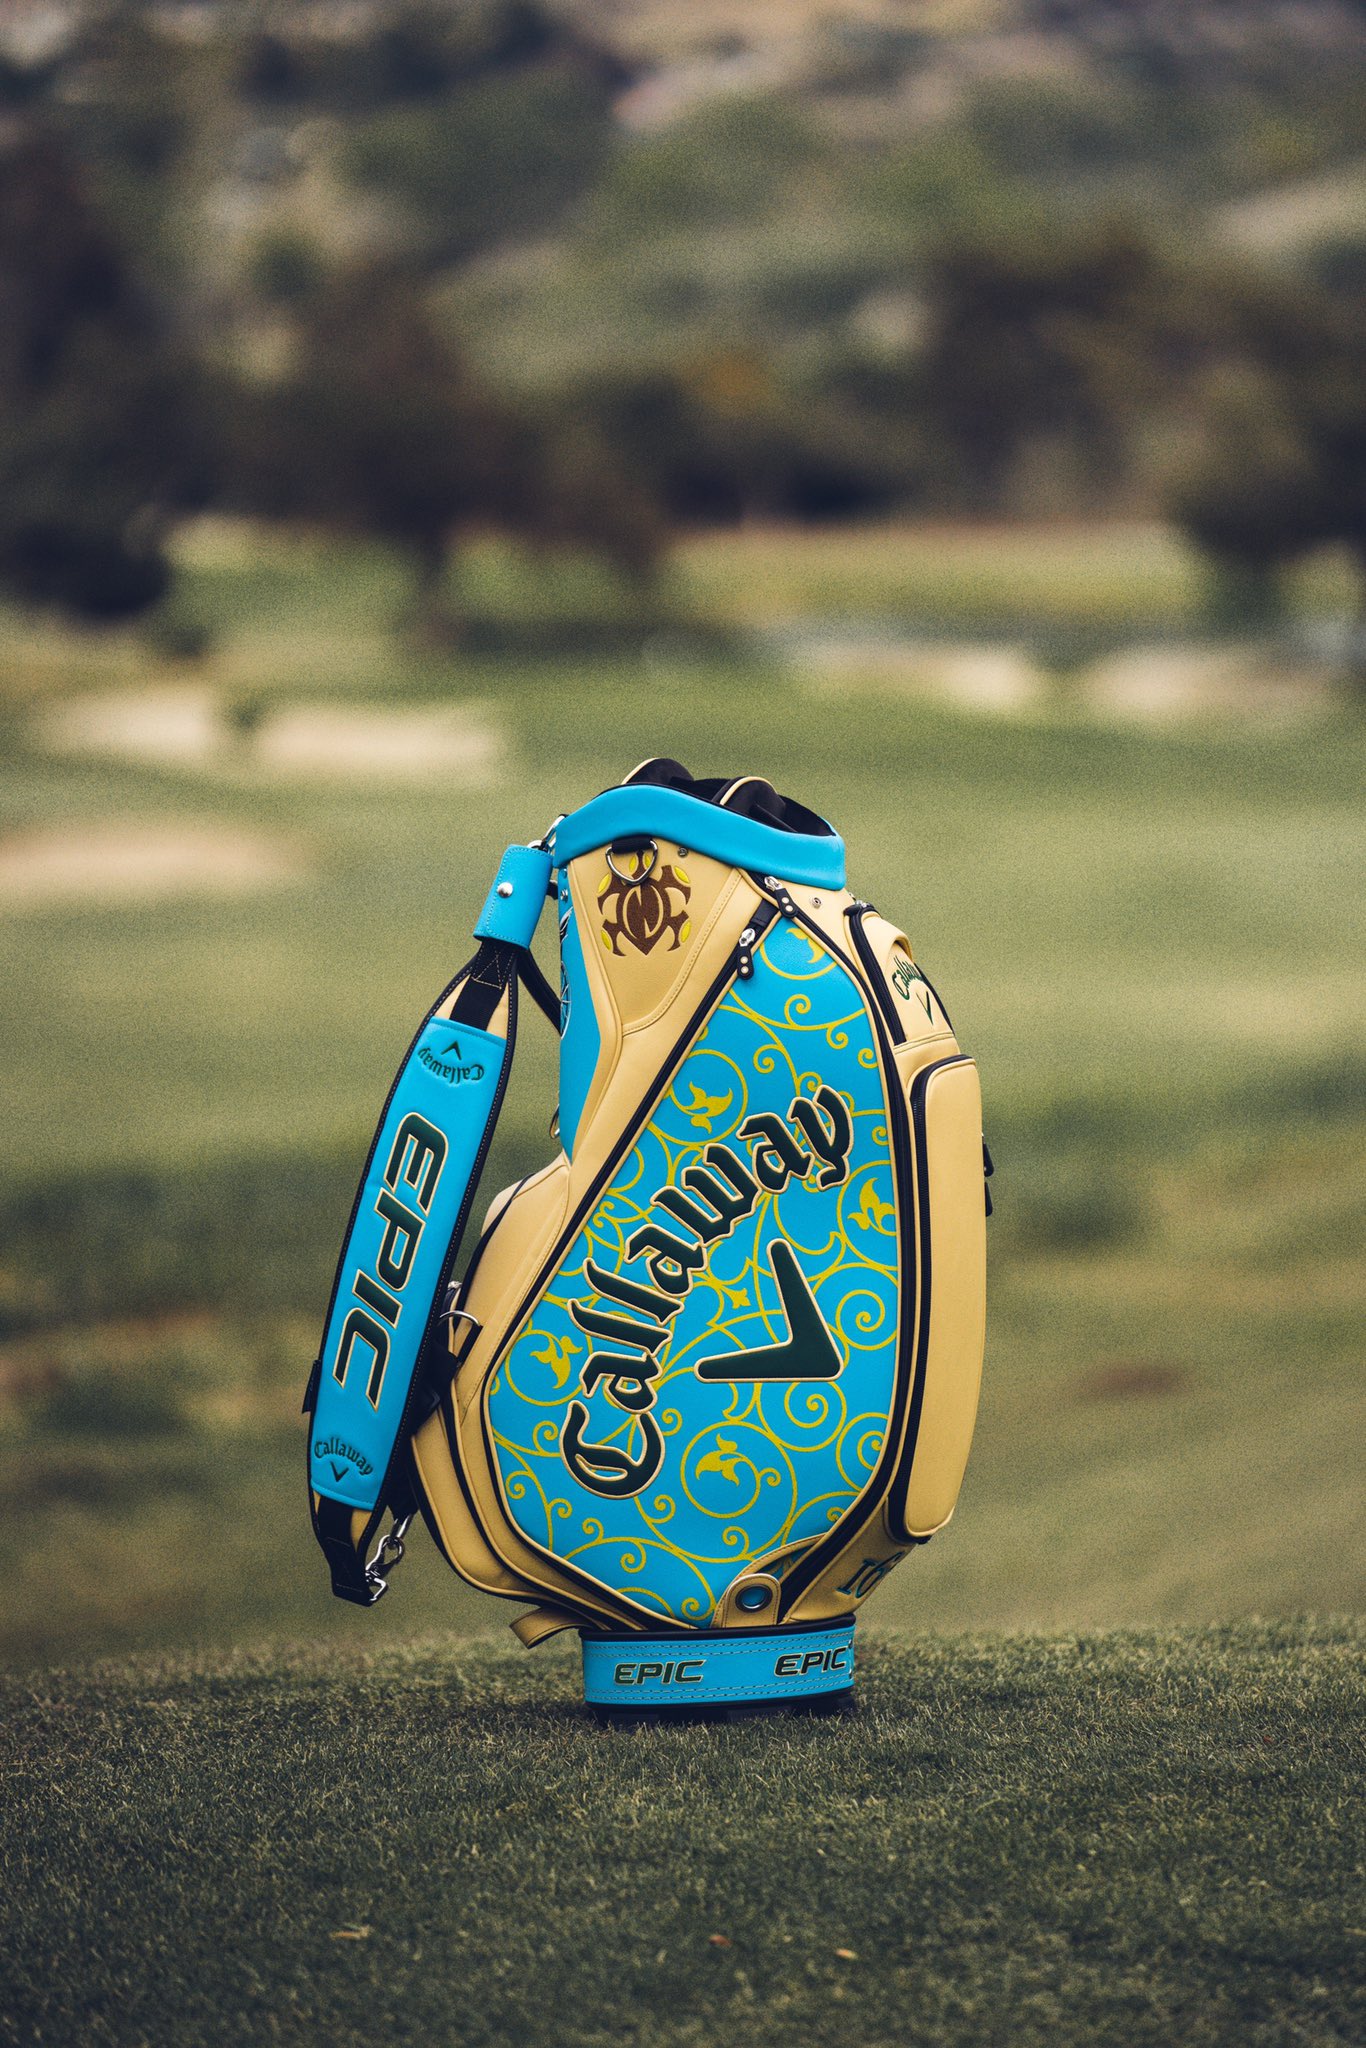 Callaway Golf on Twitter: "🌊⛳️GIVEAWAY🌊⛳️ #TeamCallaway is is off to a great start at the @PGAChampionship! To celebrate this week's major we are giving away a custom bag and head TO